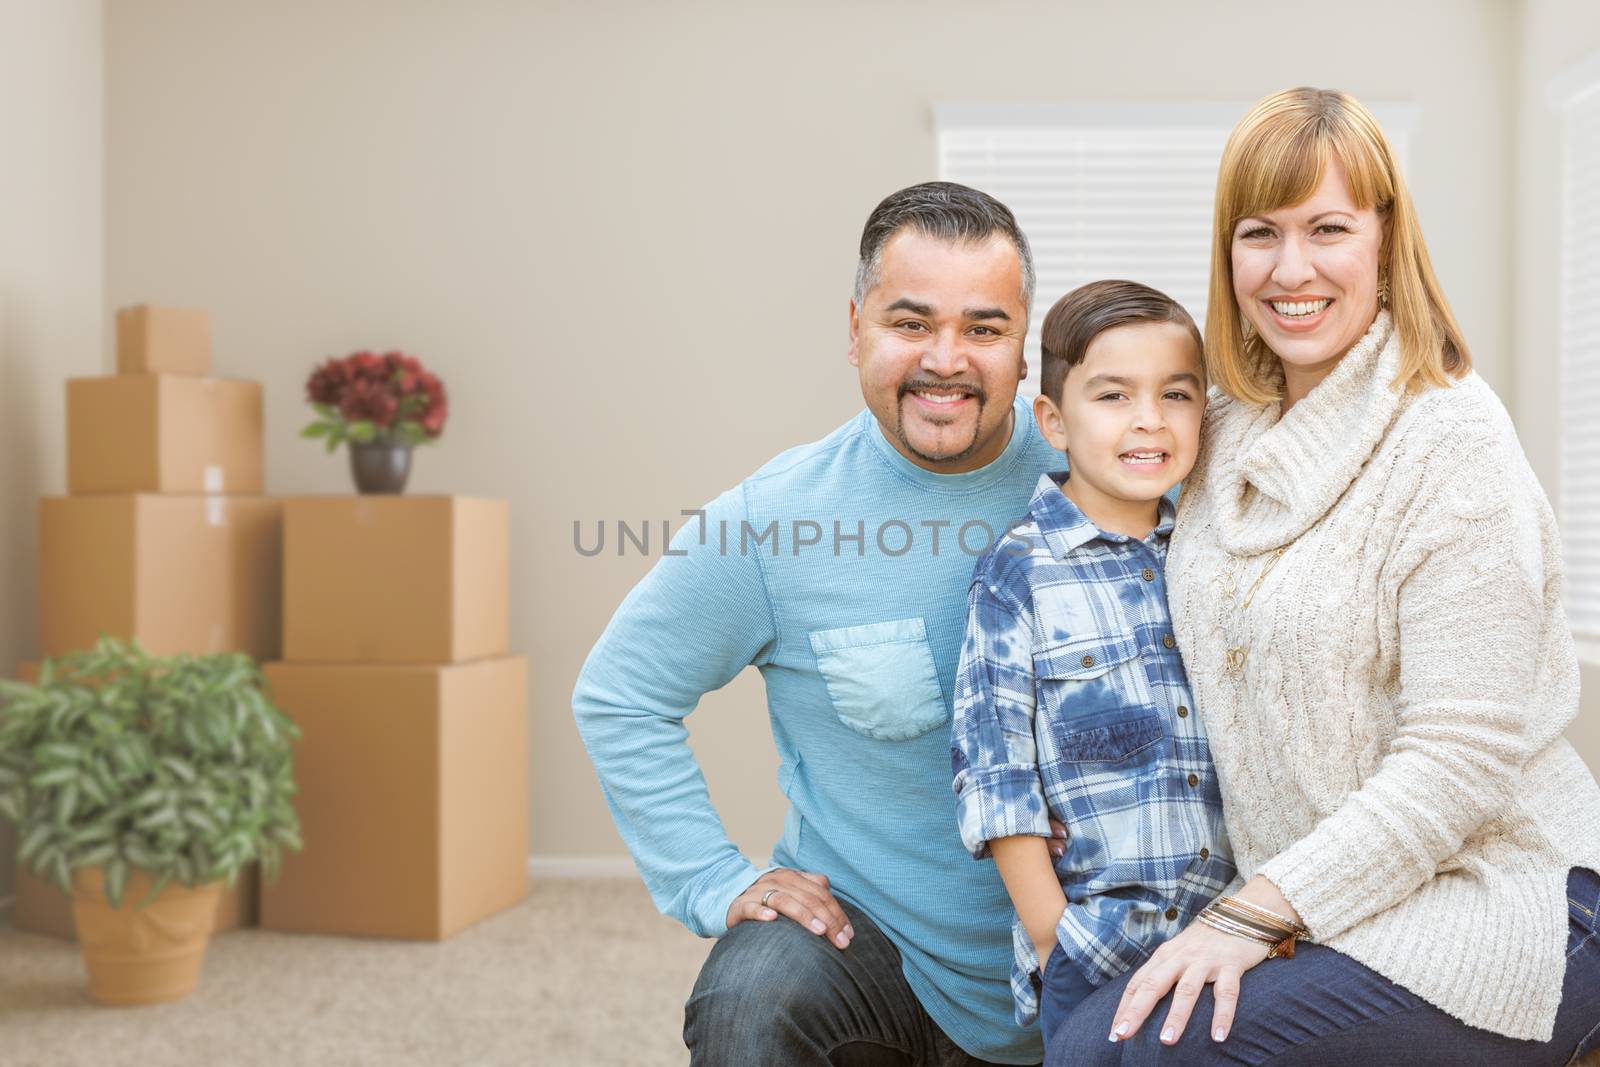 Mixed Race Family with Son in Room with Packed Moving Boxes by Feverpitched